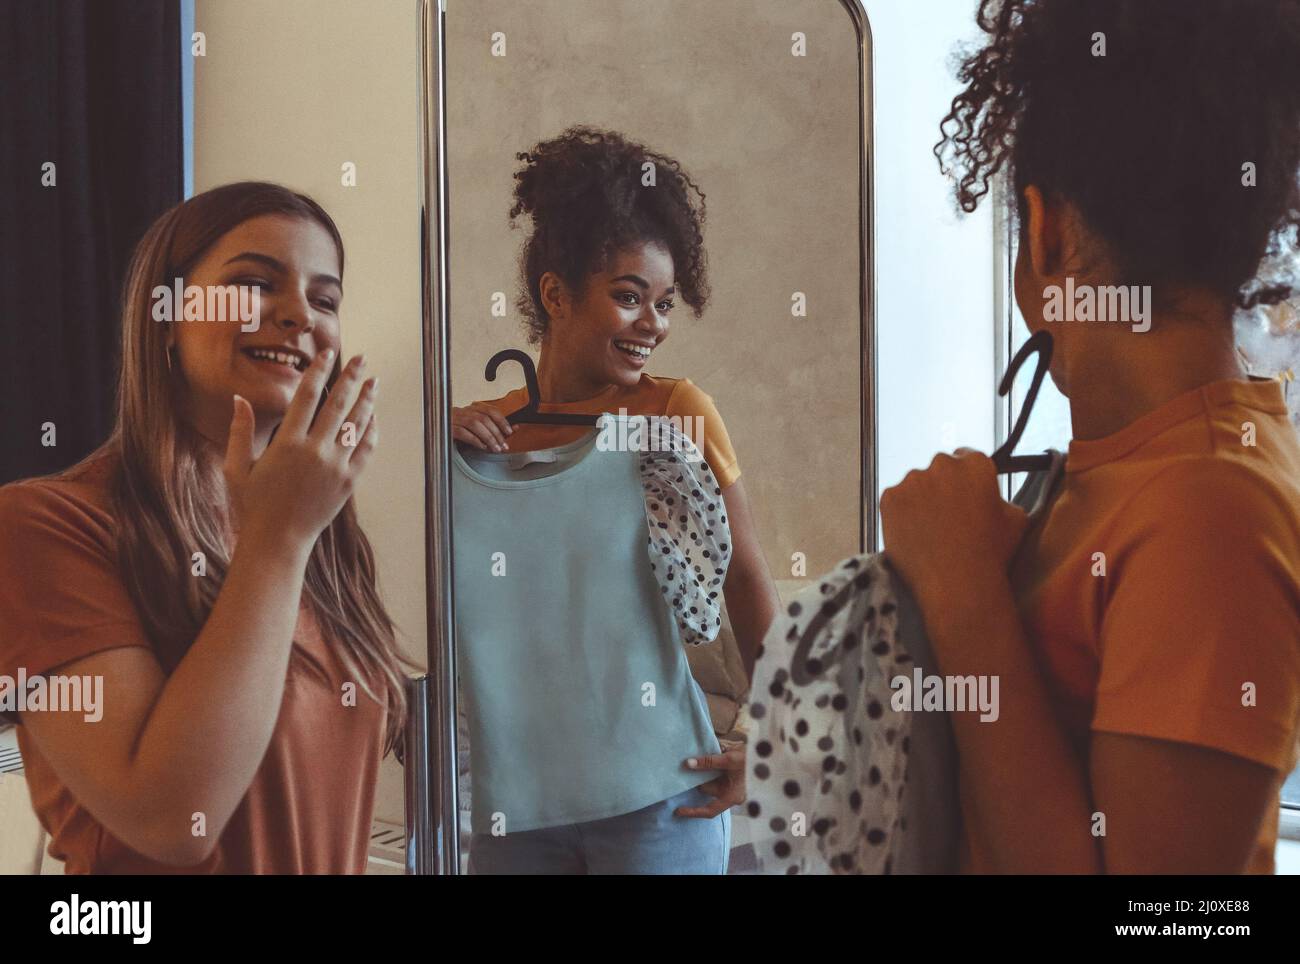 Two young ladies having fun trying on clothes in front of mirror at home Stock Photo